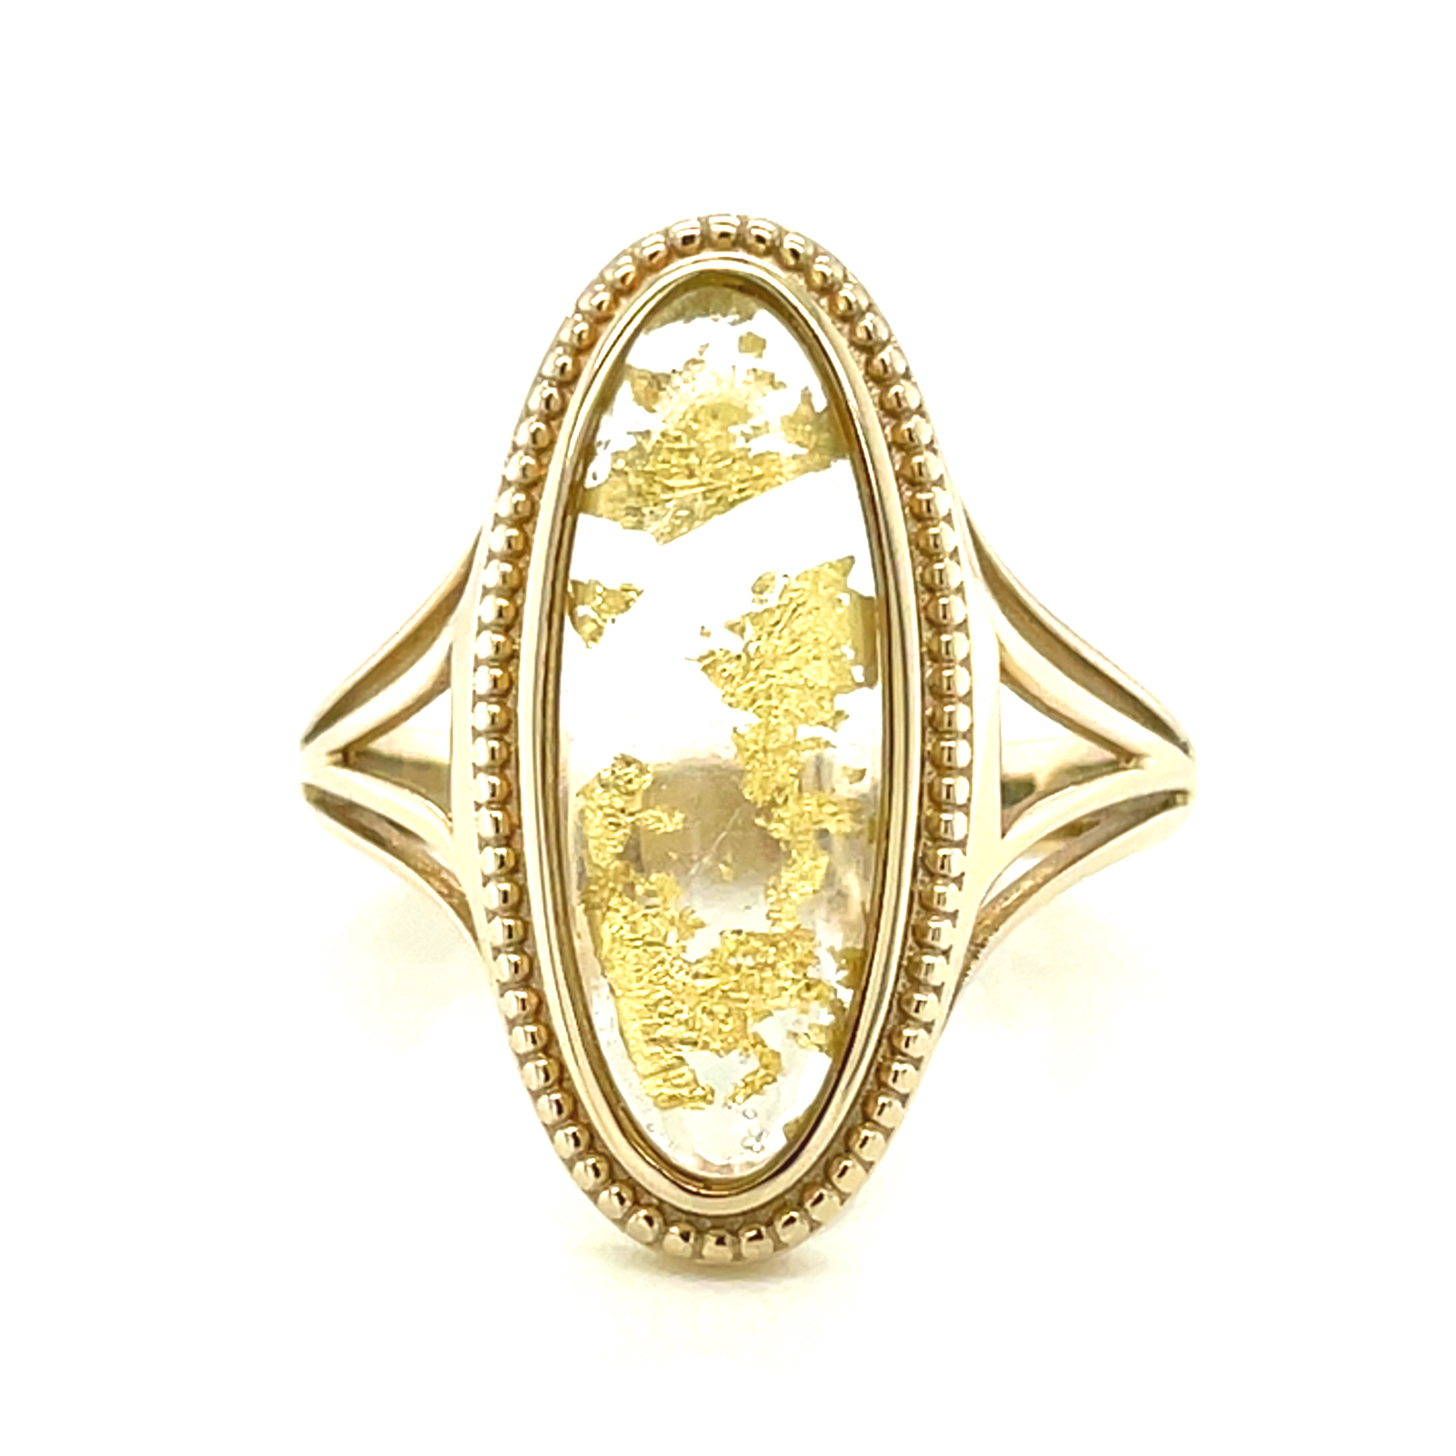 Bergkristall/Blattgold, farblos/gold, oval Cabochon, ca. 4,00 ct. Edelstein Ring Gelbgold 375/000 Sogni d´oro Classic